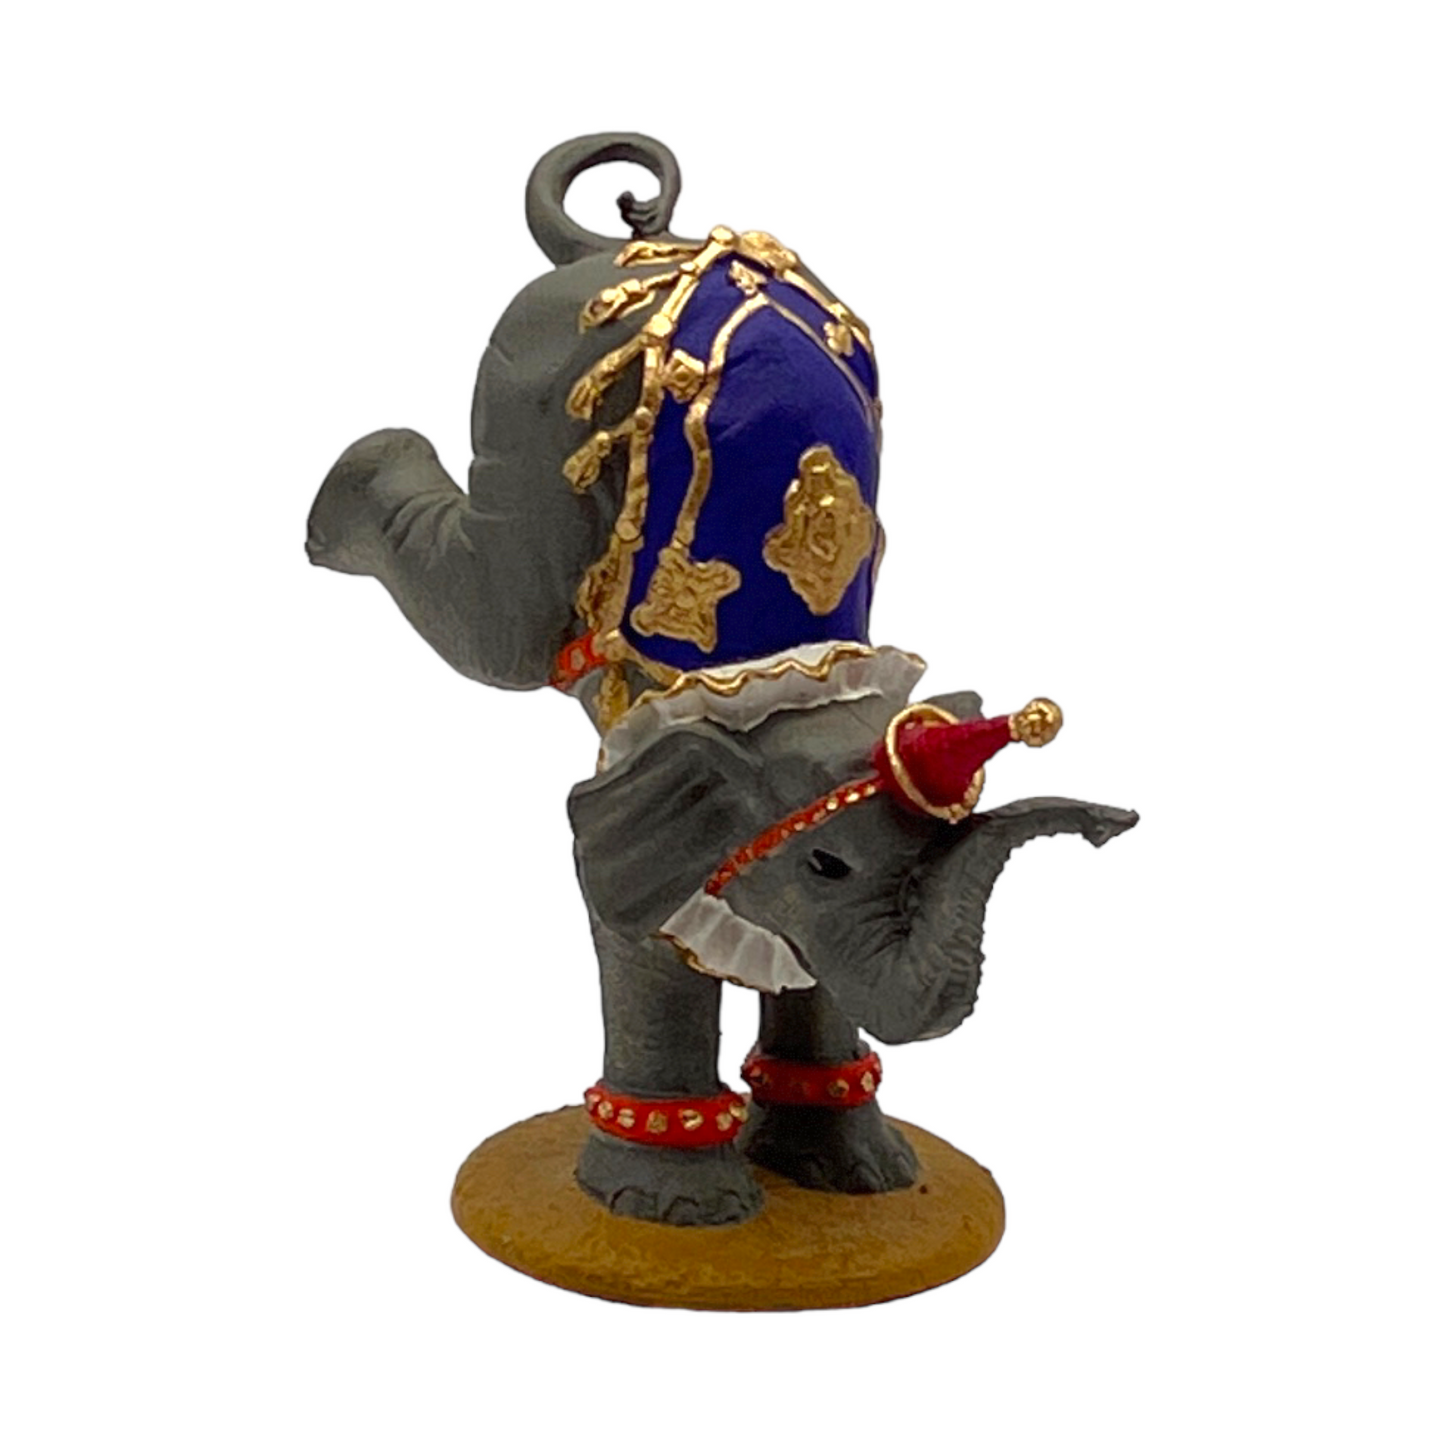 Ringling Brothers – Baby Elephant Figurine – 0077 Of 9500 – 3"